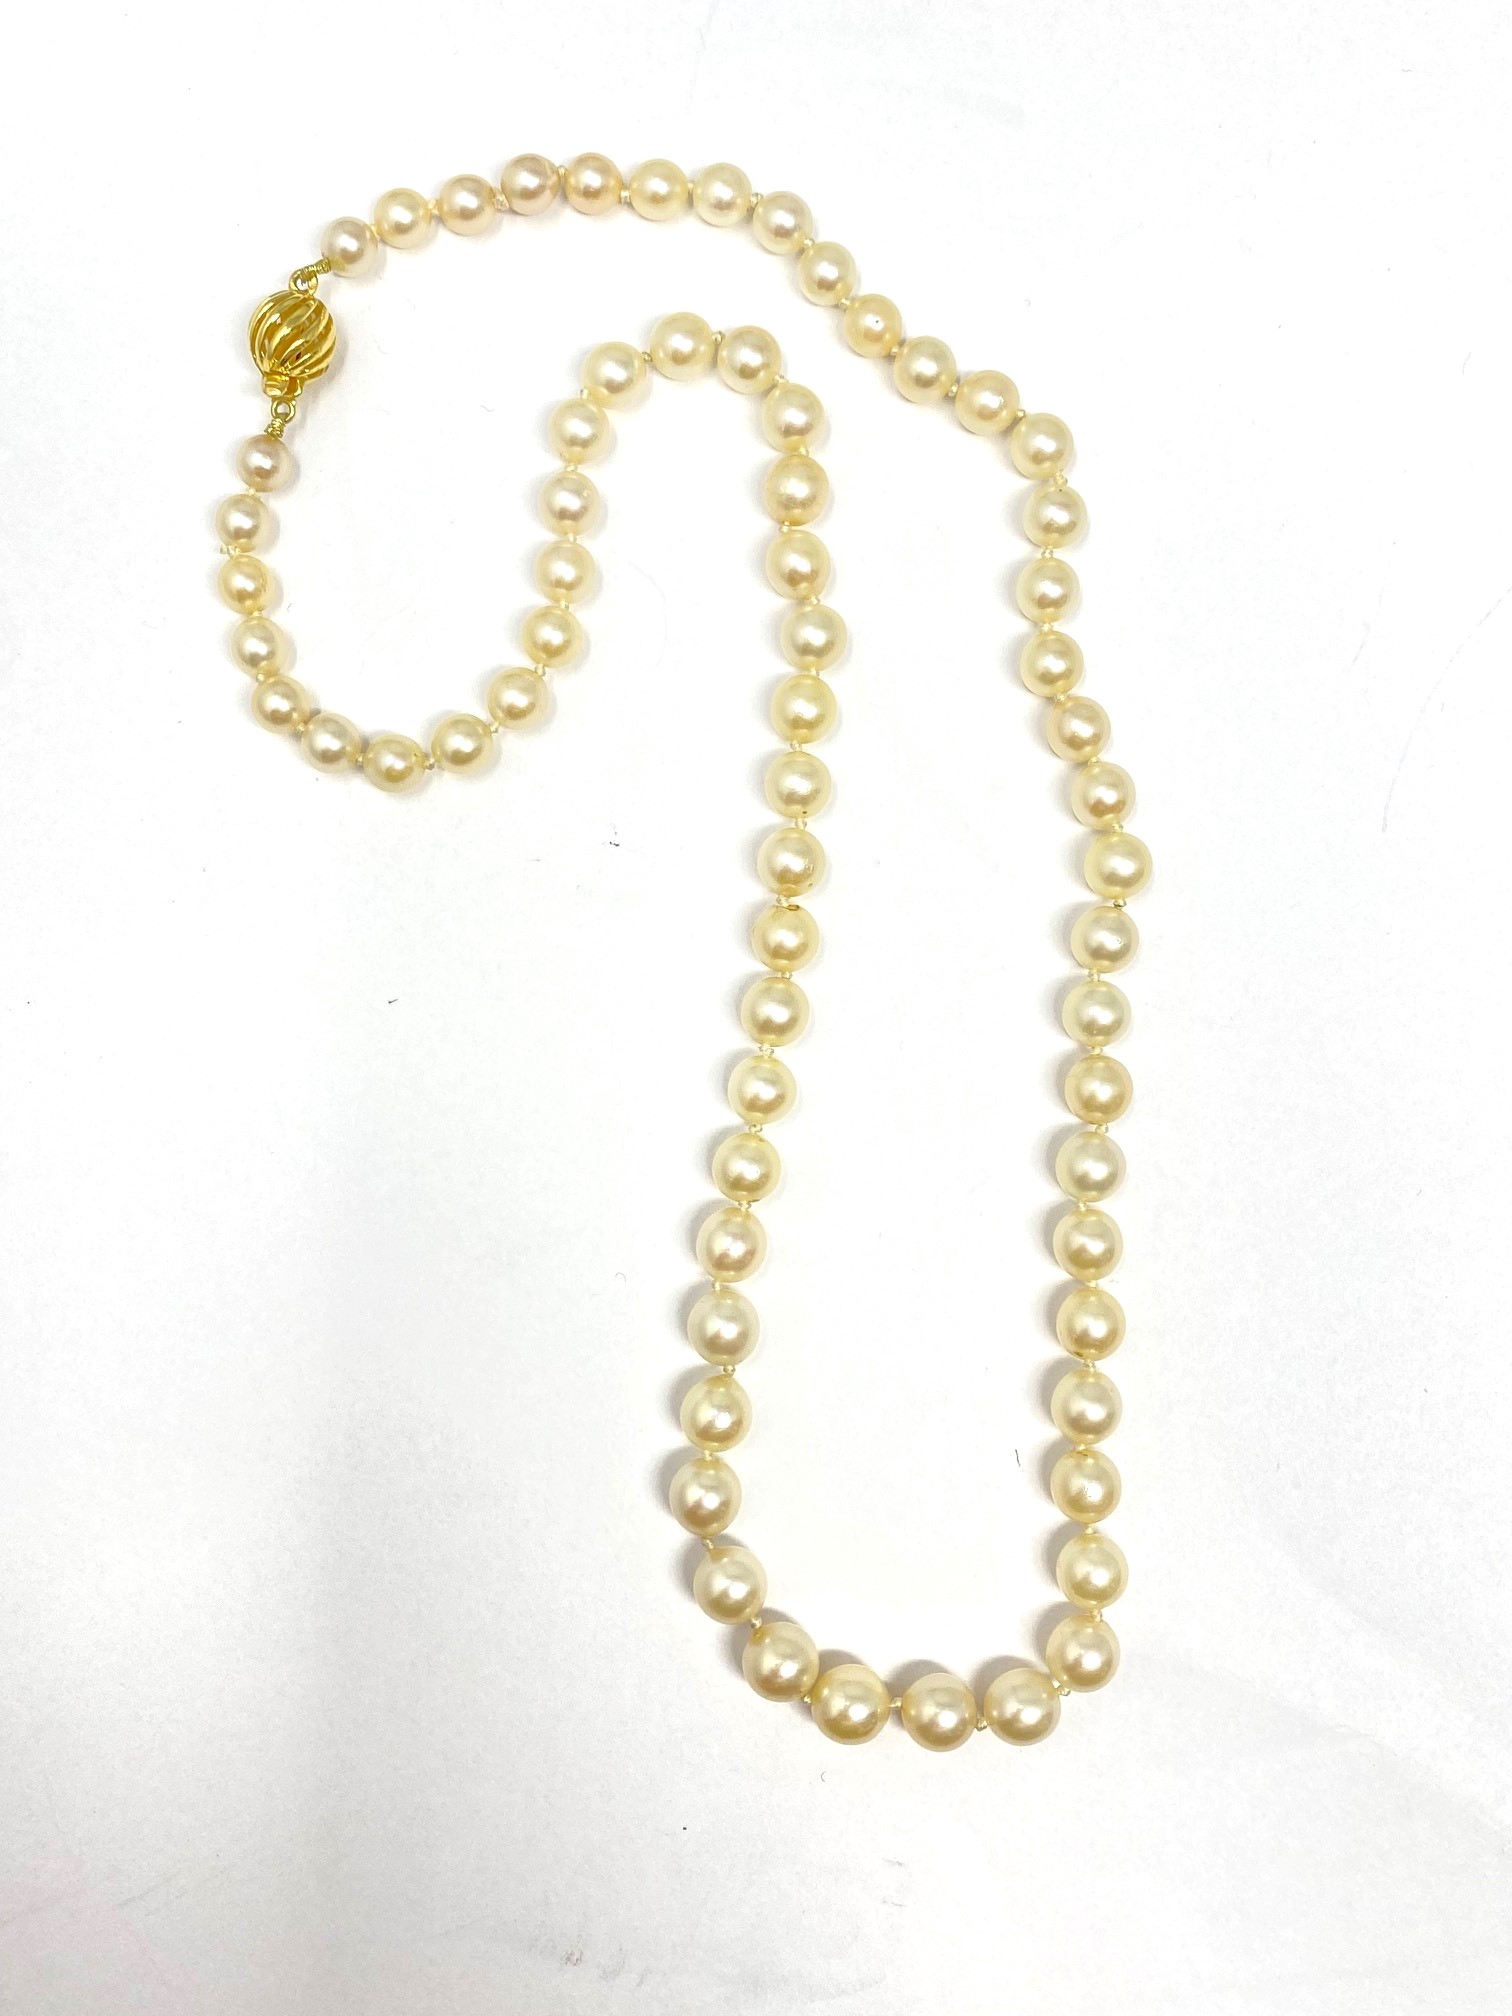 THREE CULTURED PEARL NECKLACES - Image 2 of 2